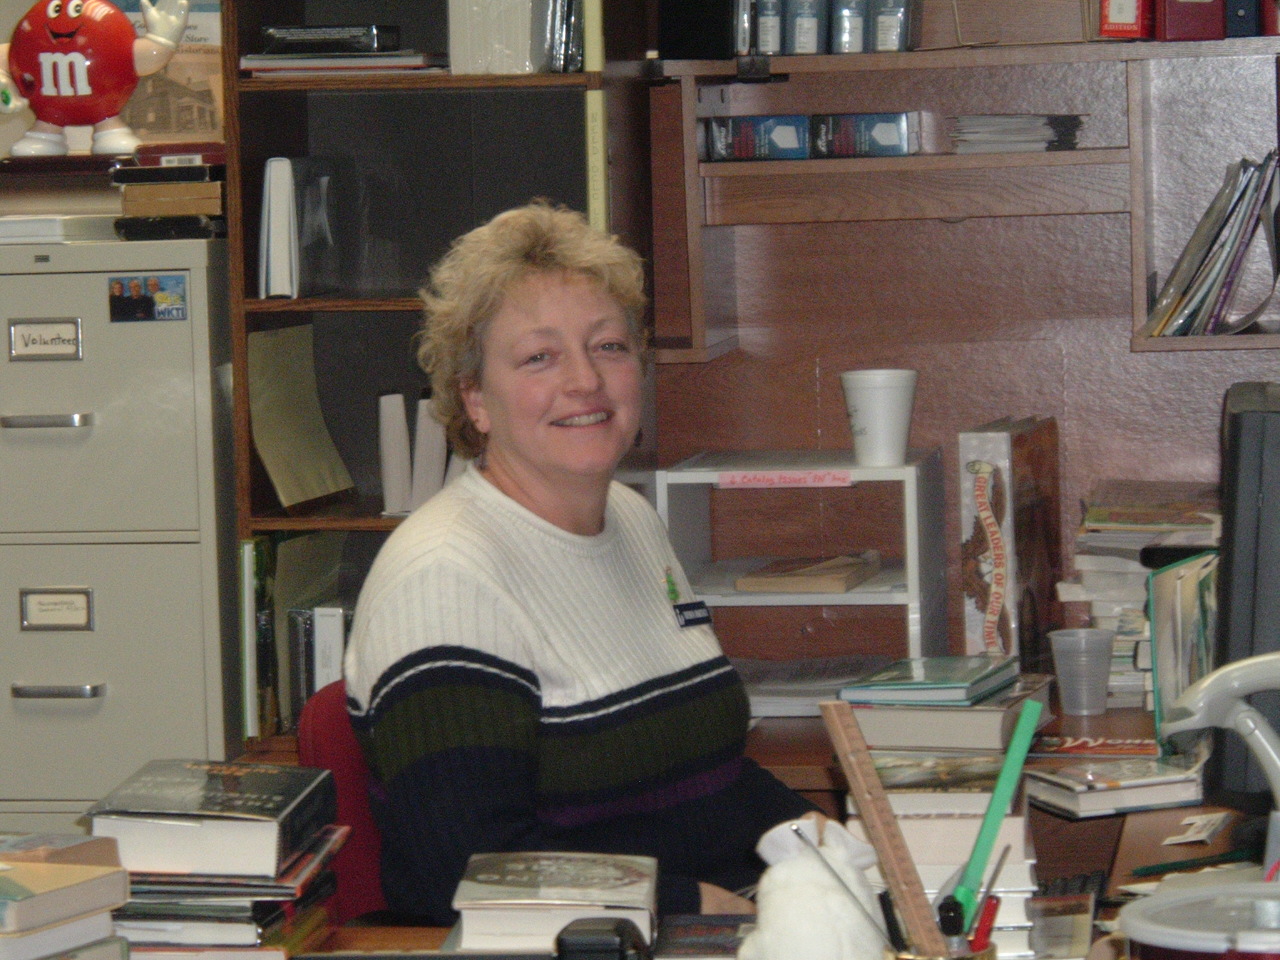 a woman in a sweater smiling and sitting at a desk